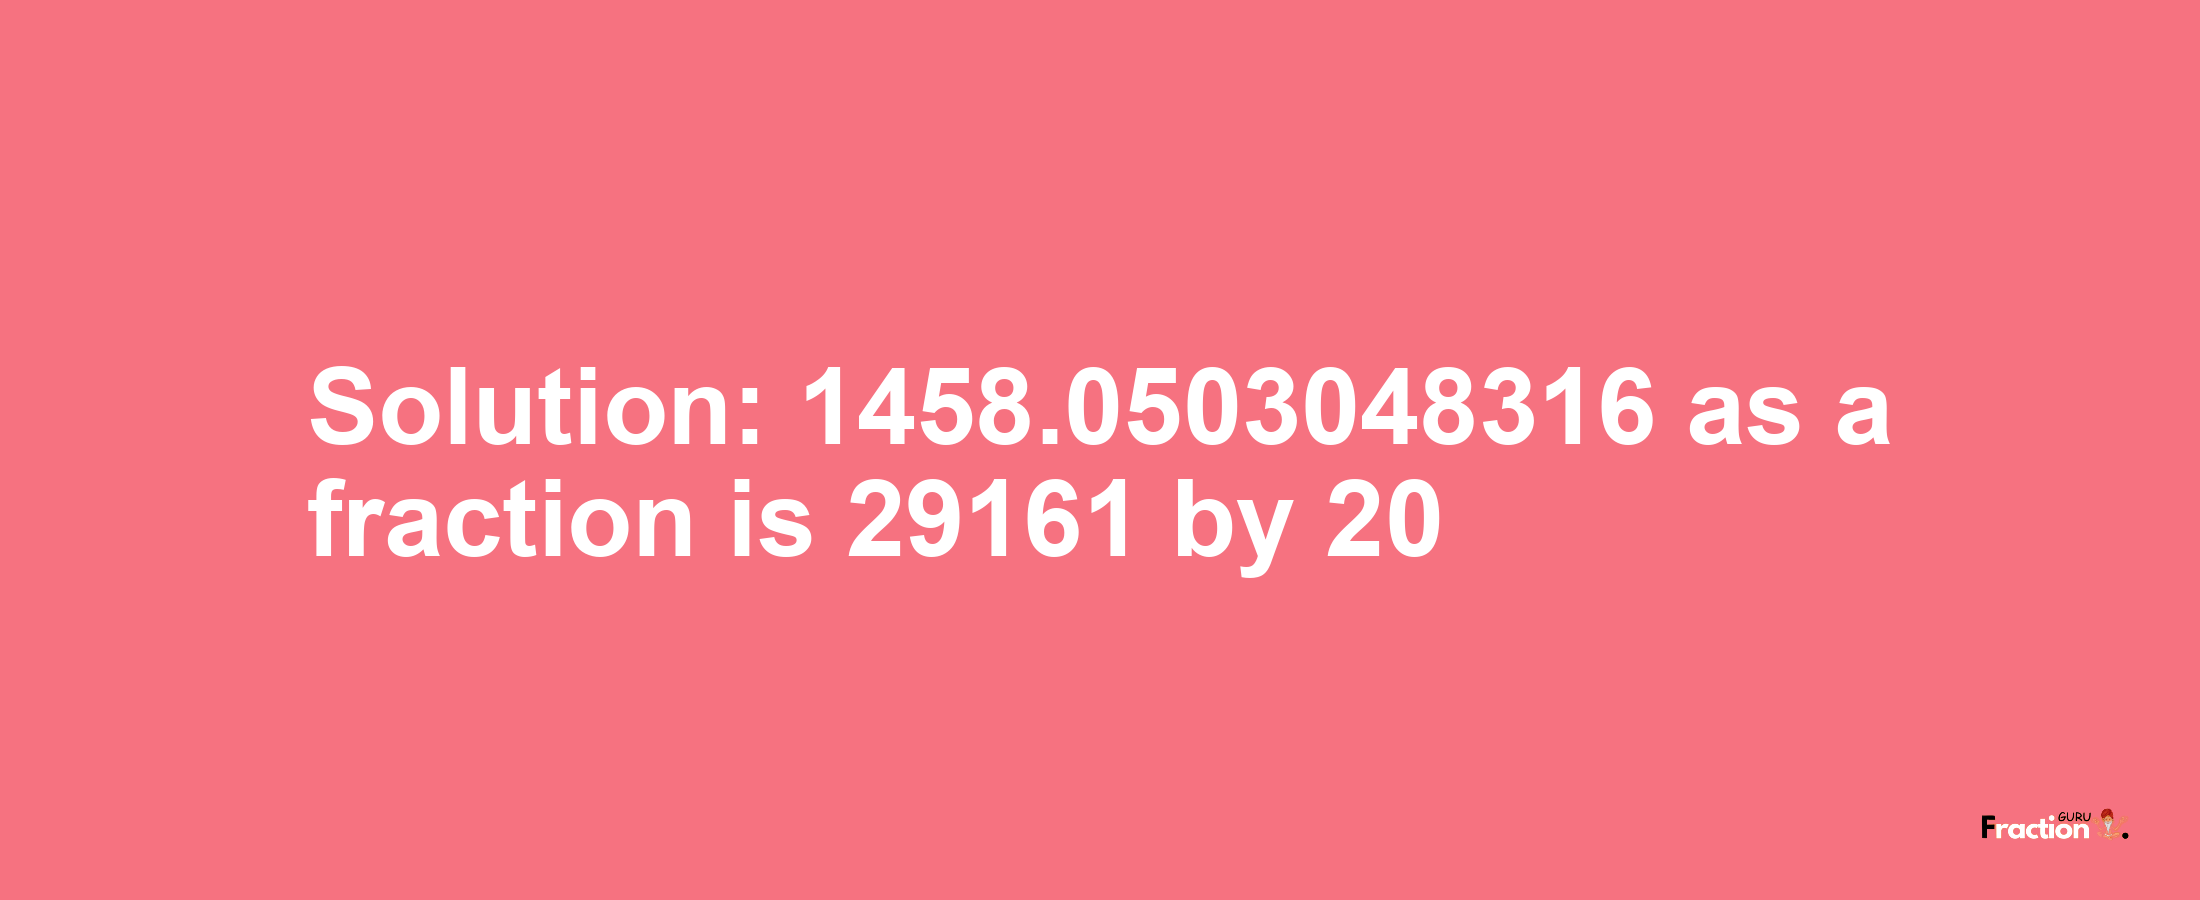 Solution:1458.0503048316 as a fraction is 29161/20